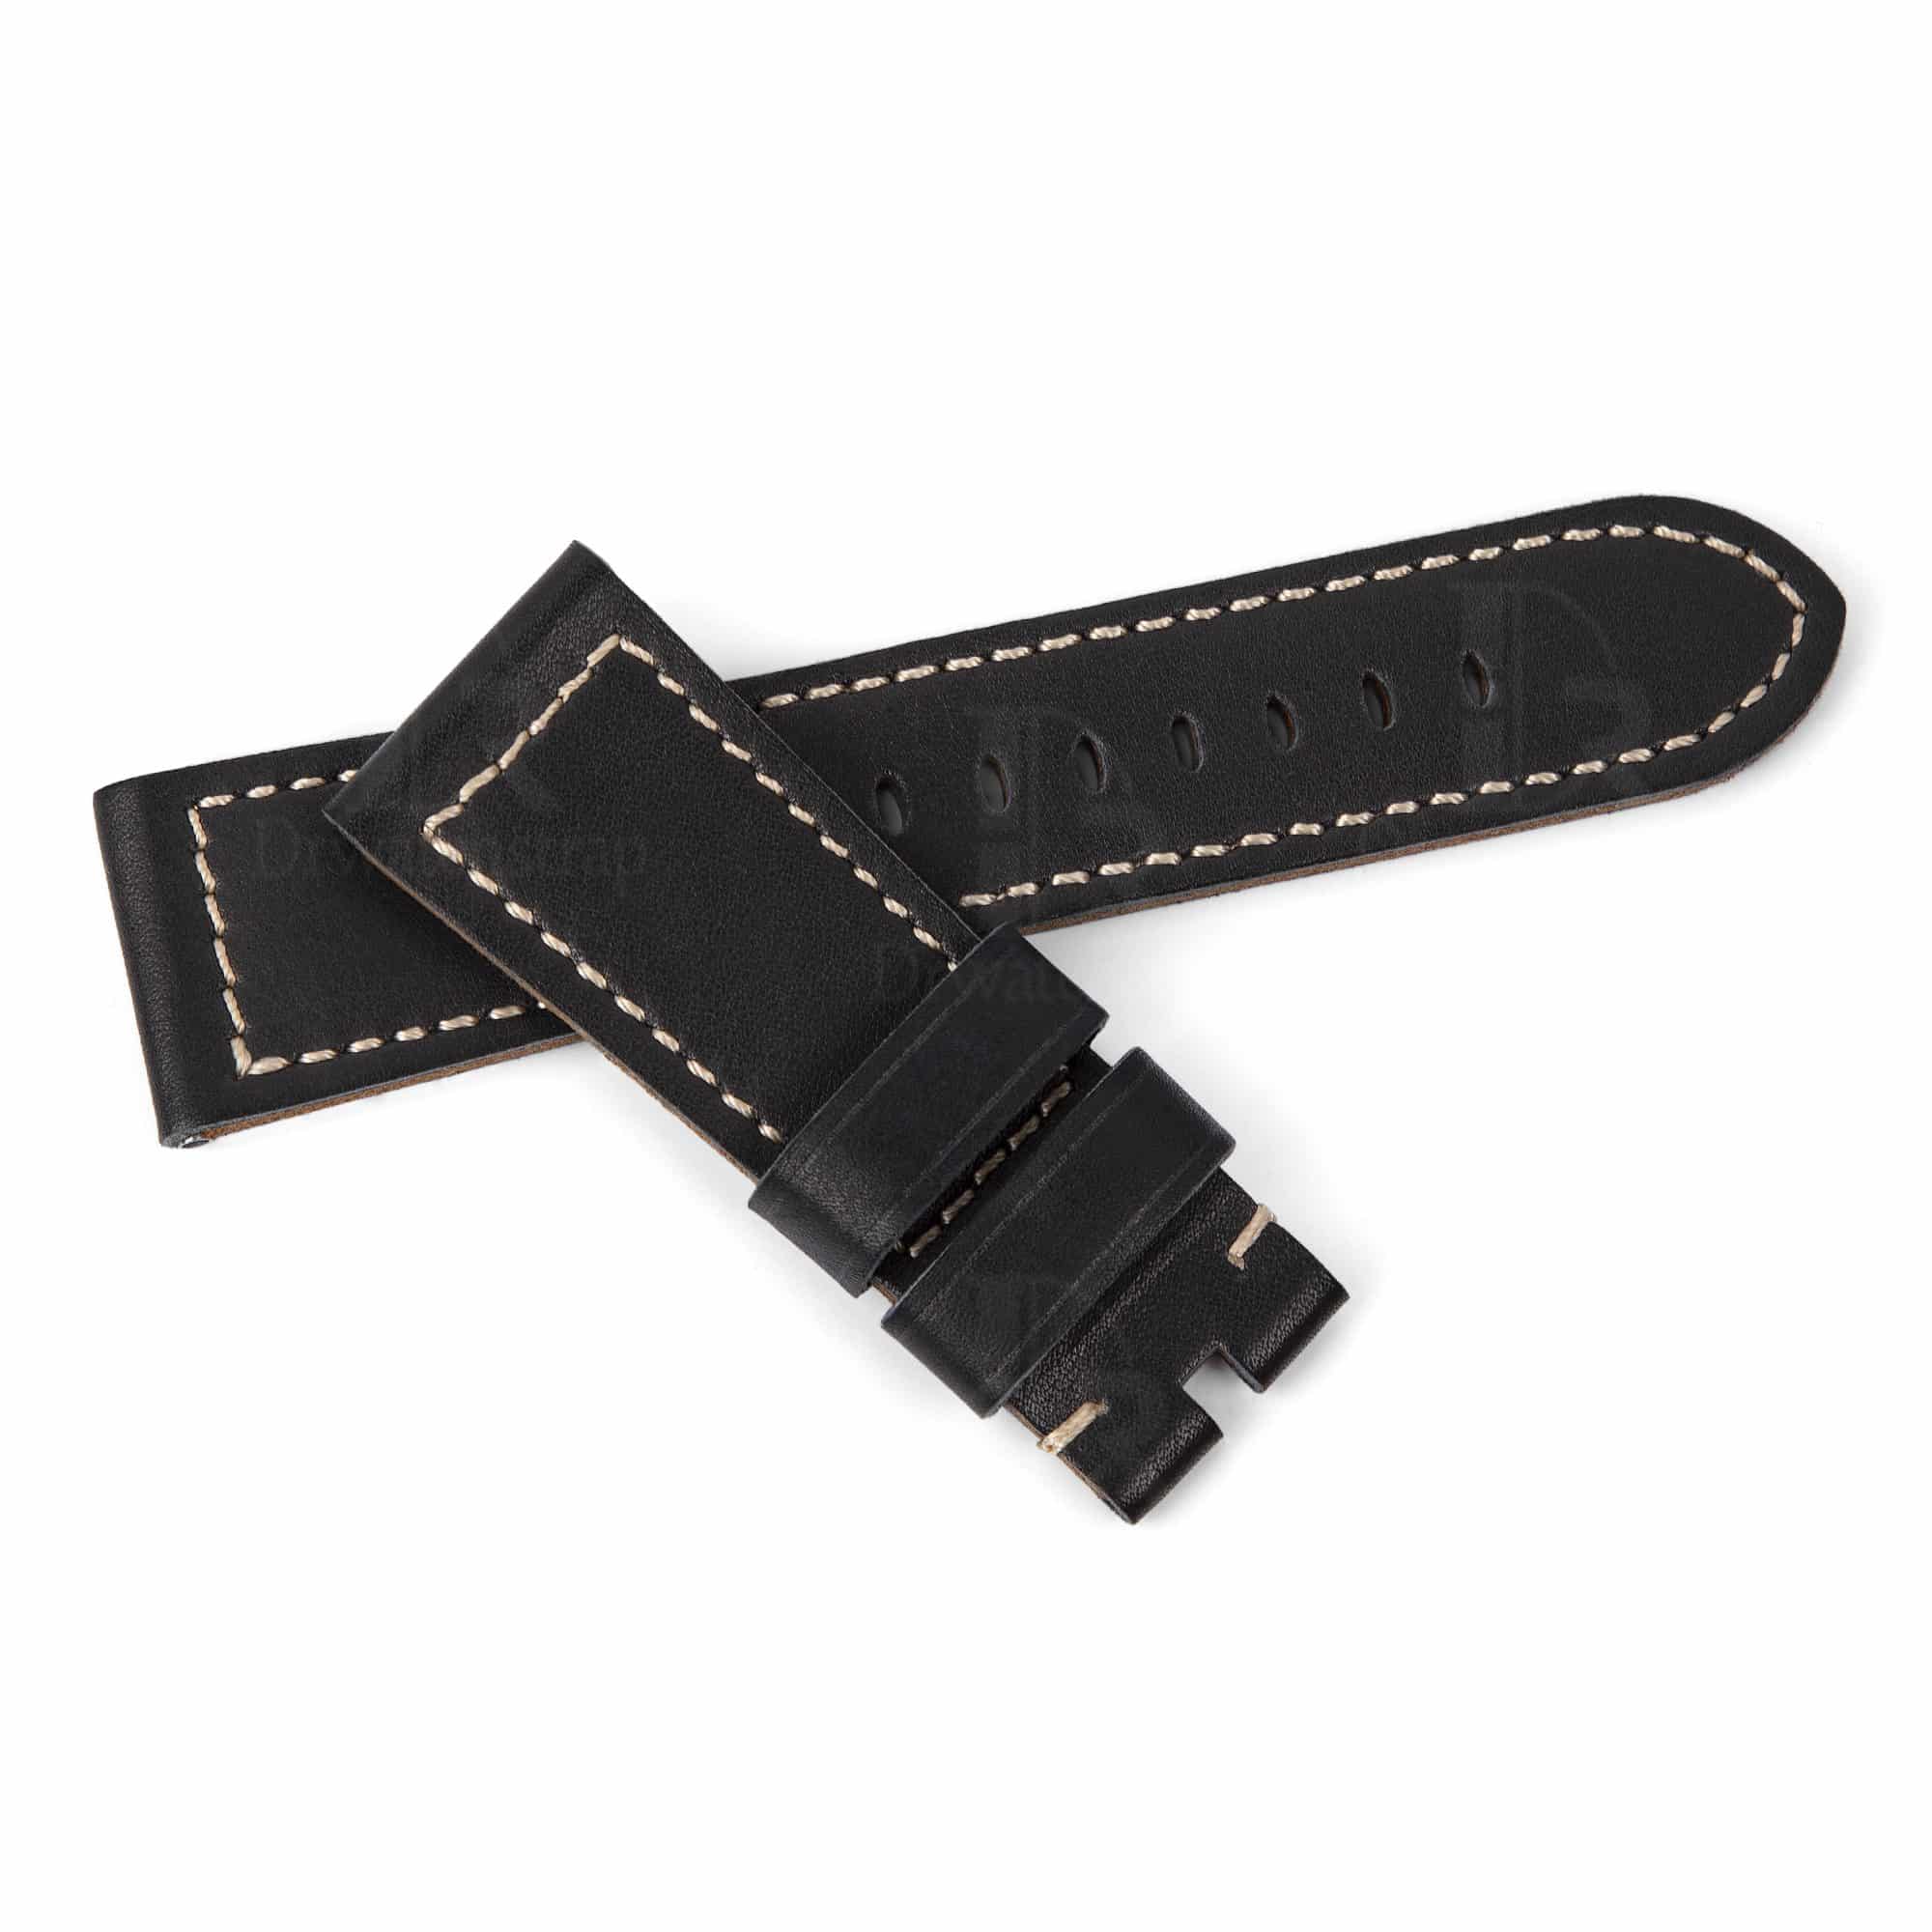 Buy replacement Panerai leather strap band for Luminor, Radiomir, Submersible